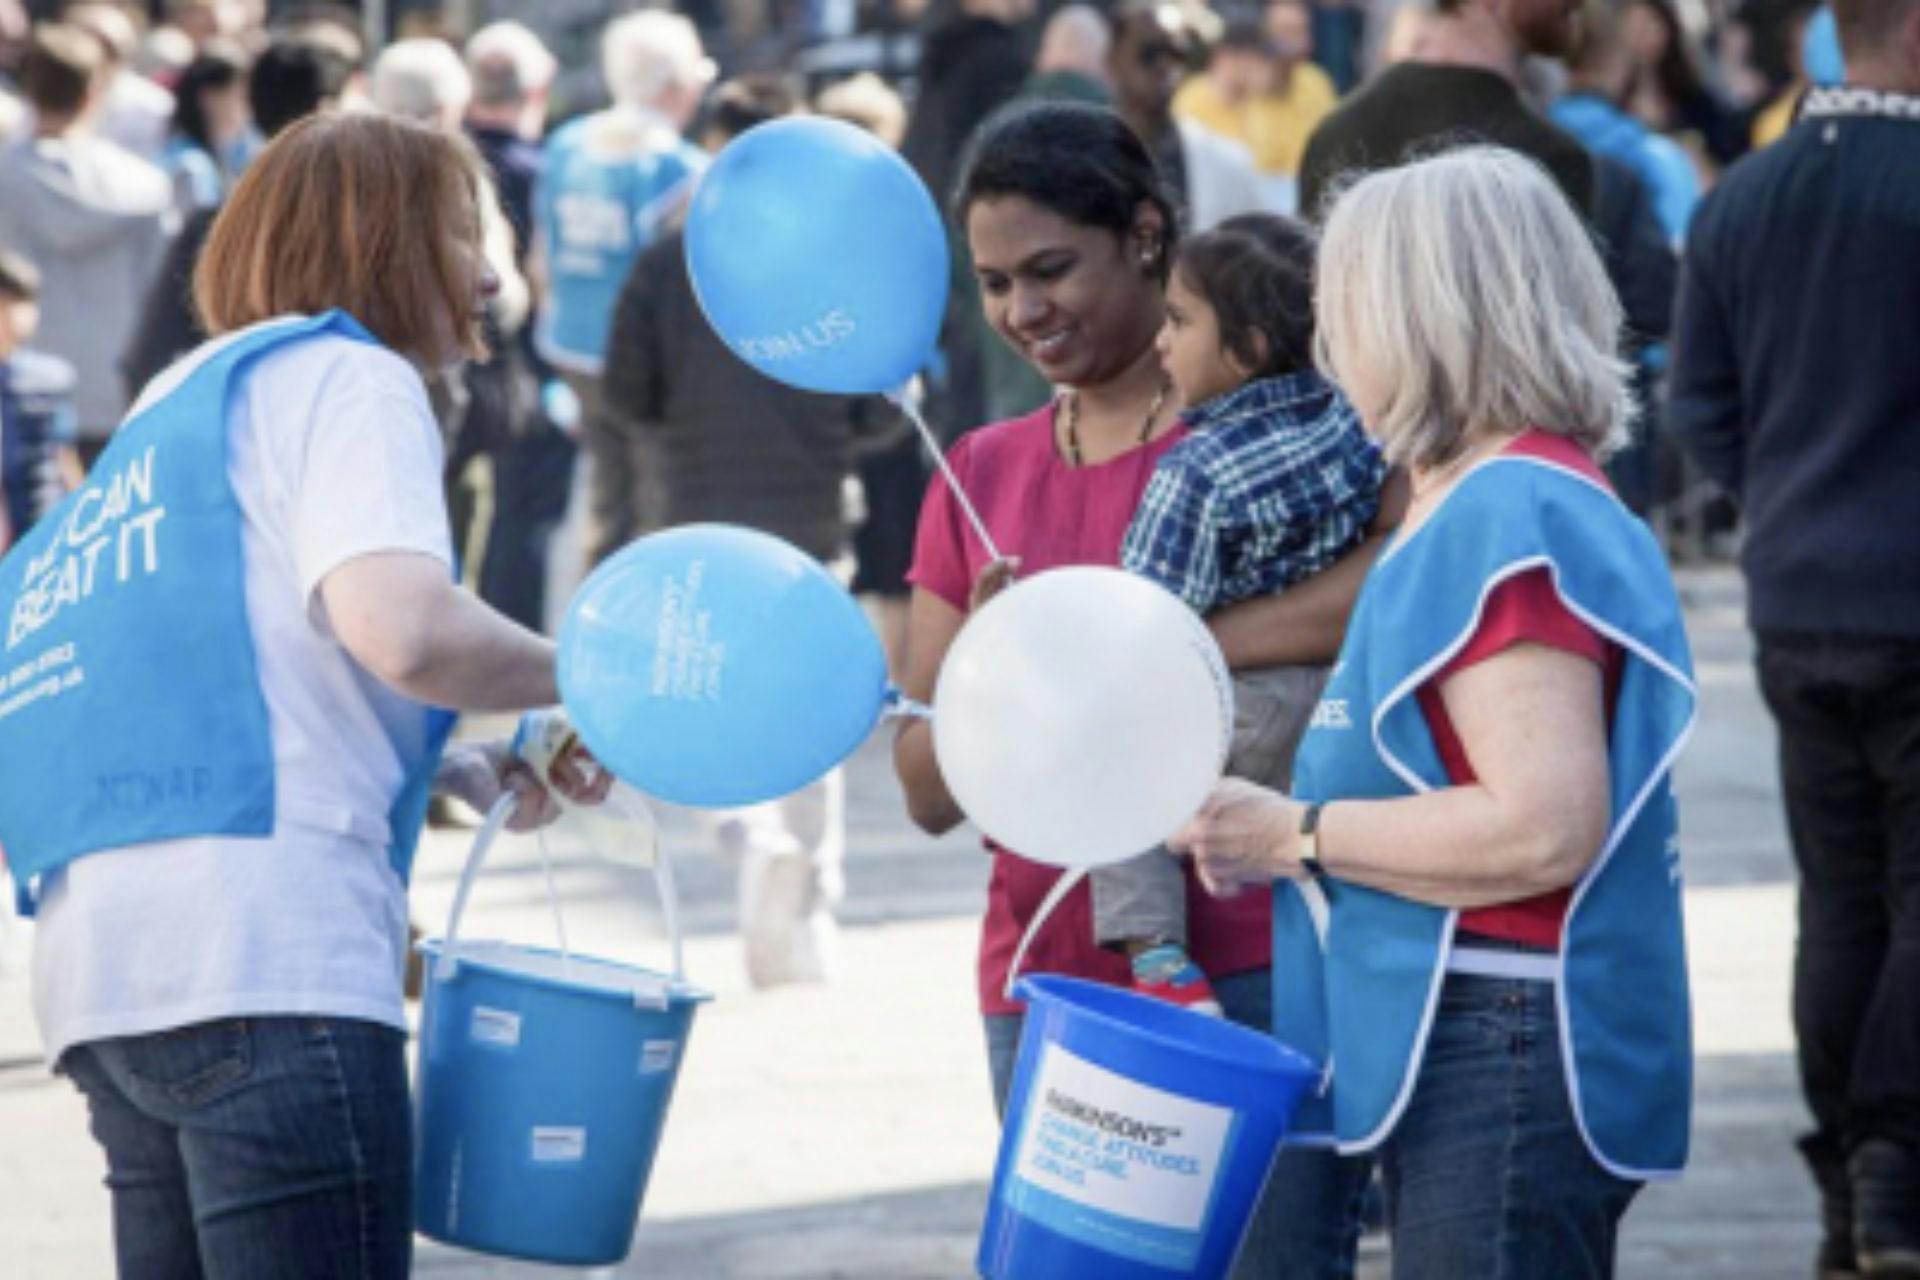 This image shows three individuals engaged in a public charitable activity. Two persons wear blue overalls.